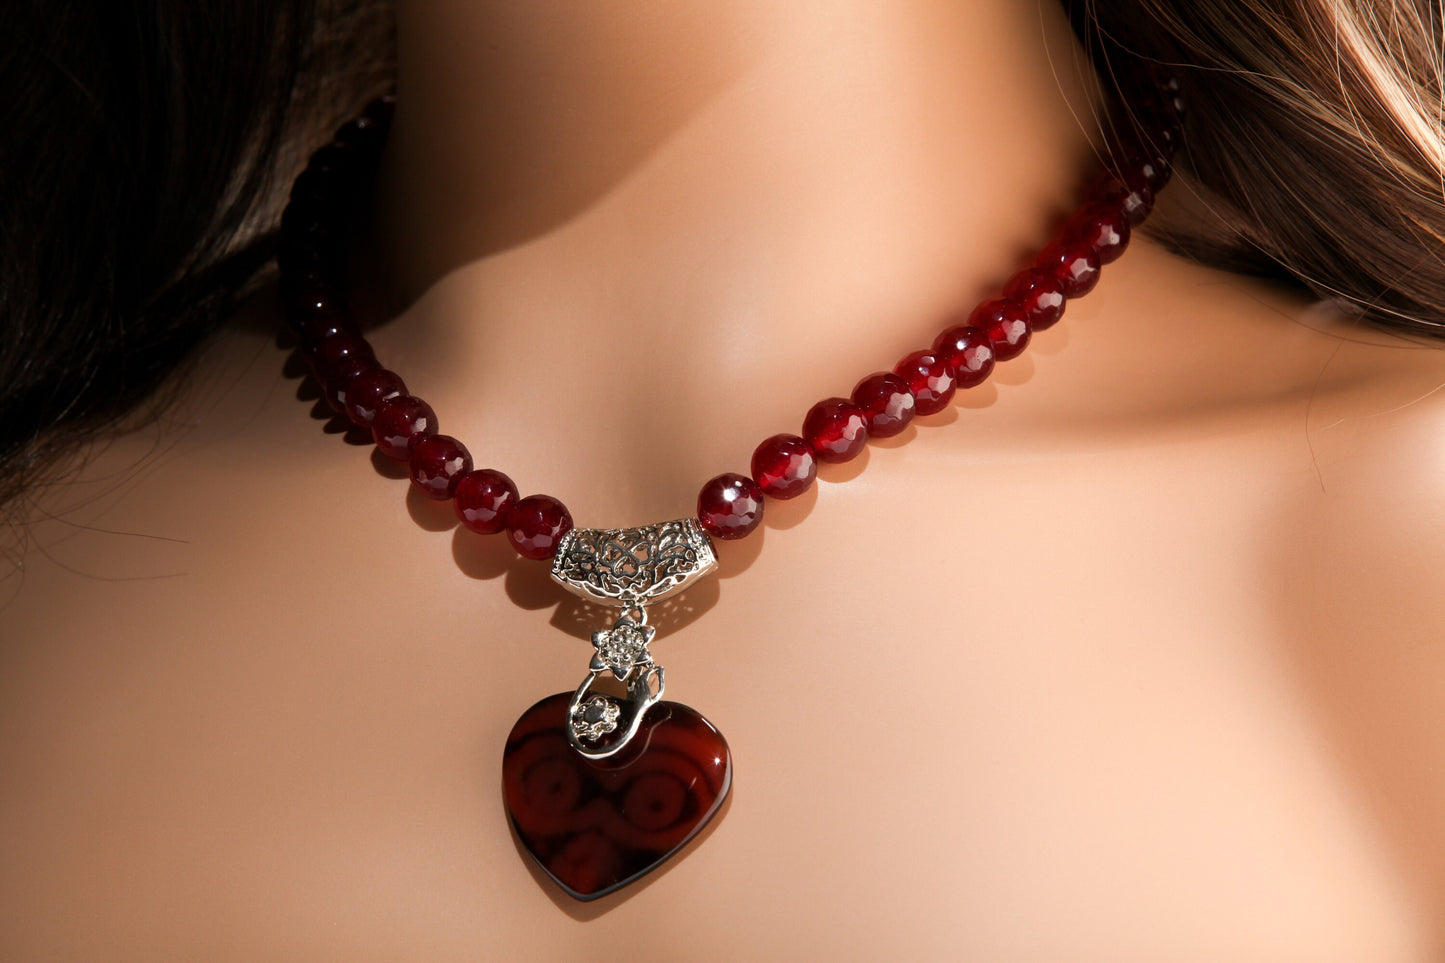 Rasberry Quartz Faceted Round Beads with Heart Shape Evil Eye DZI Agate, Rhodium Silver Filigree Fancy Bail 18.5" Necklace with 3" Extension